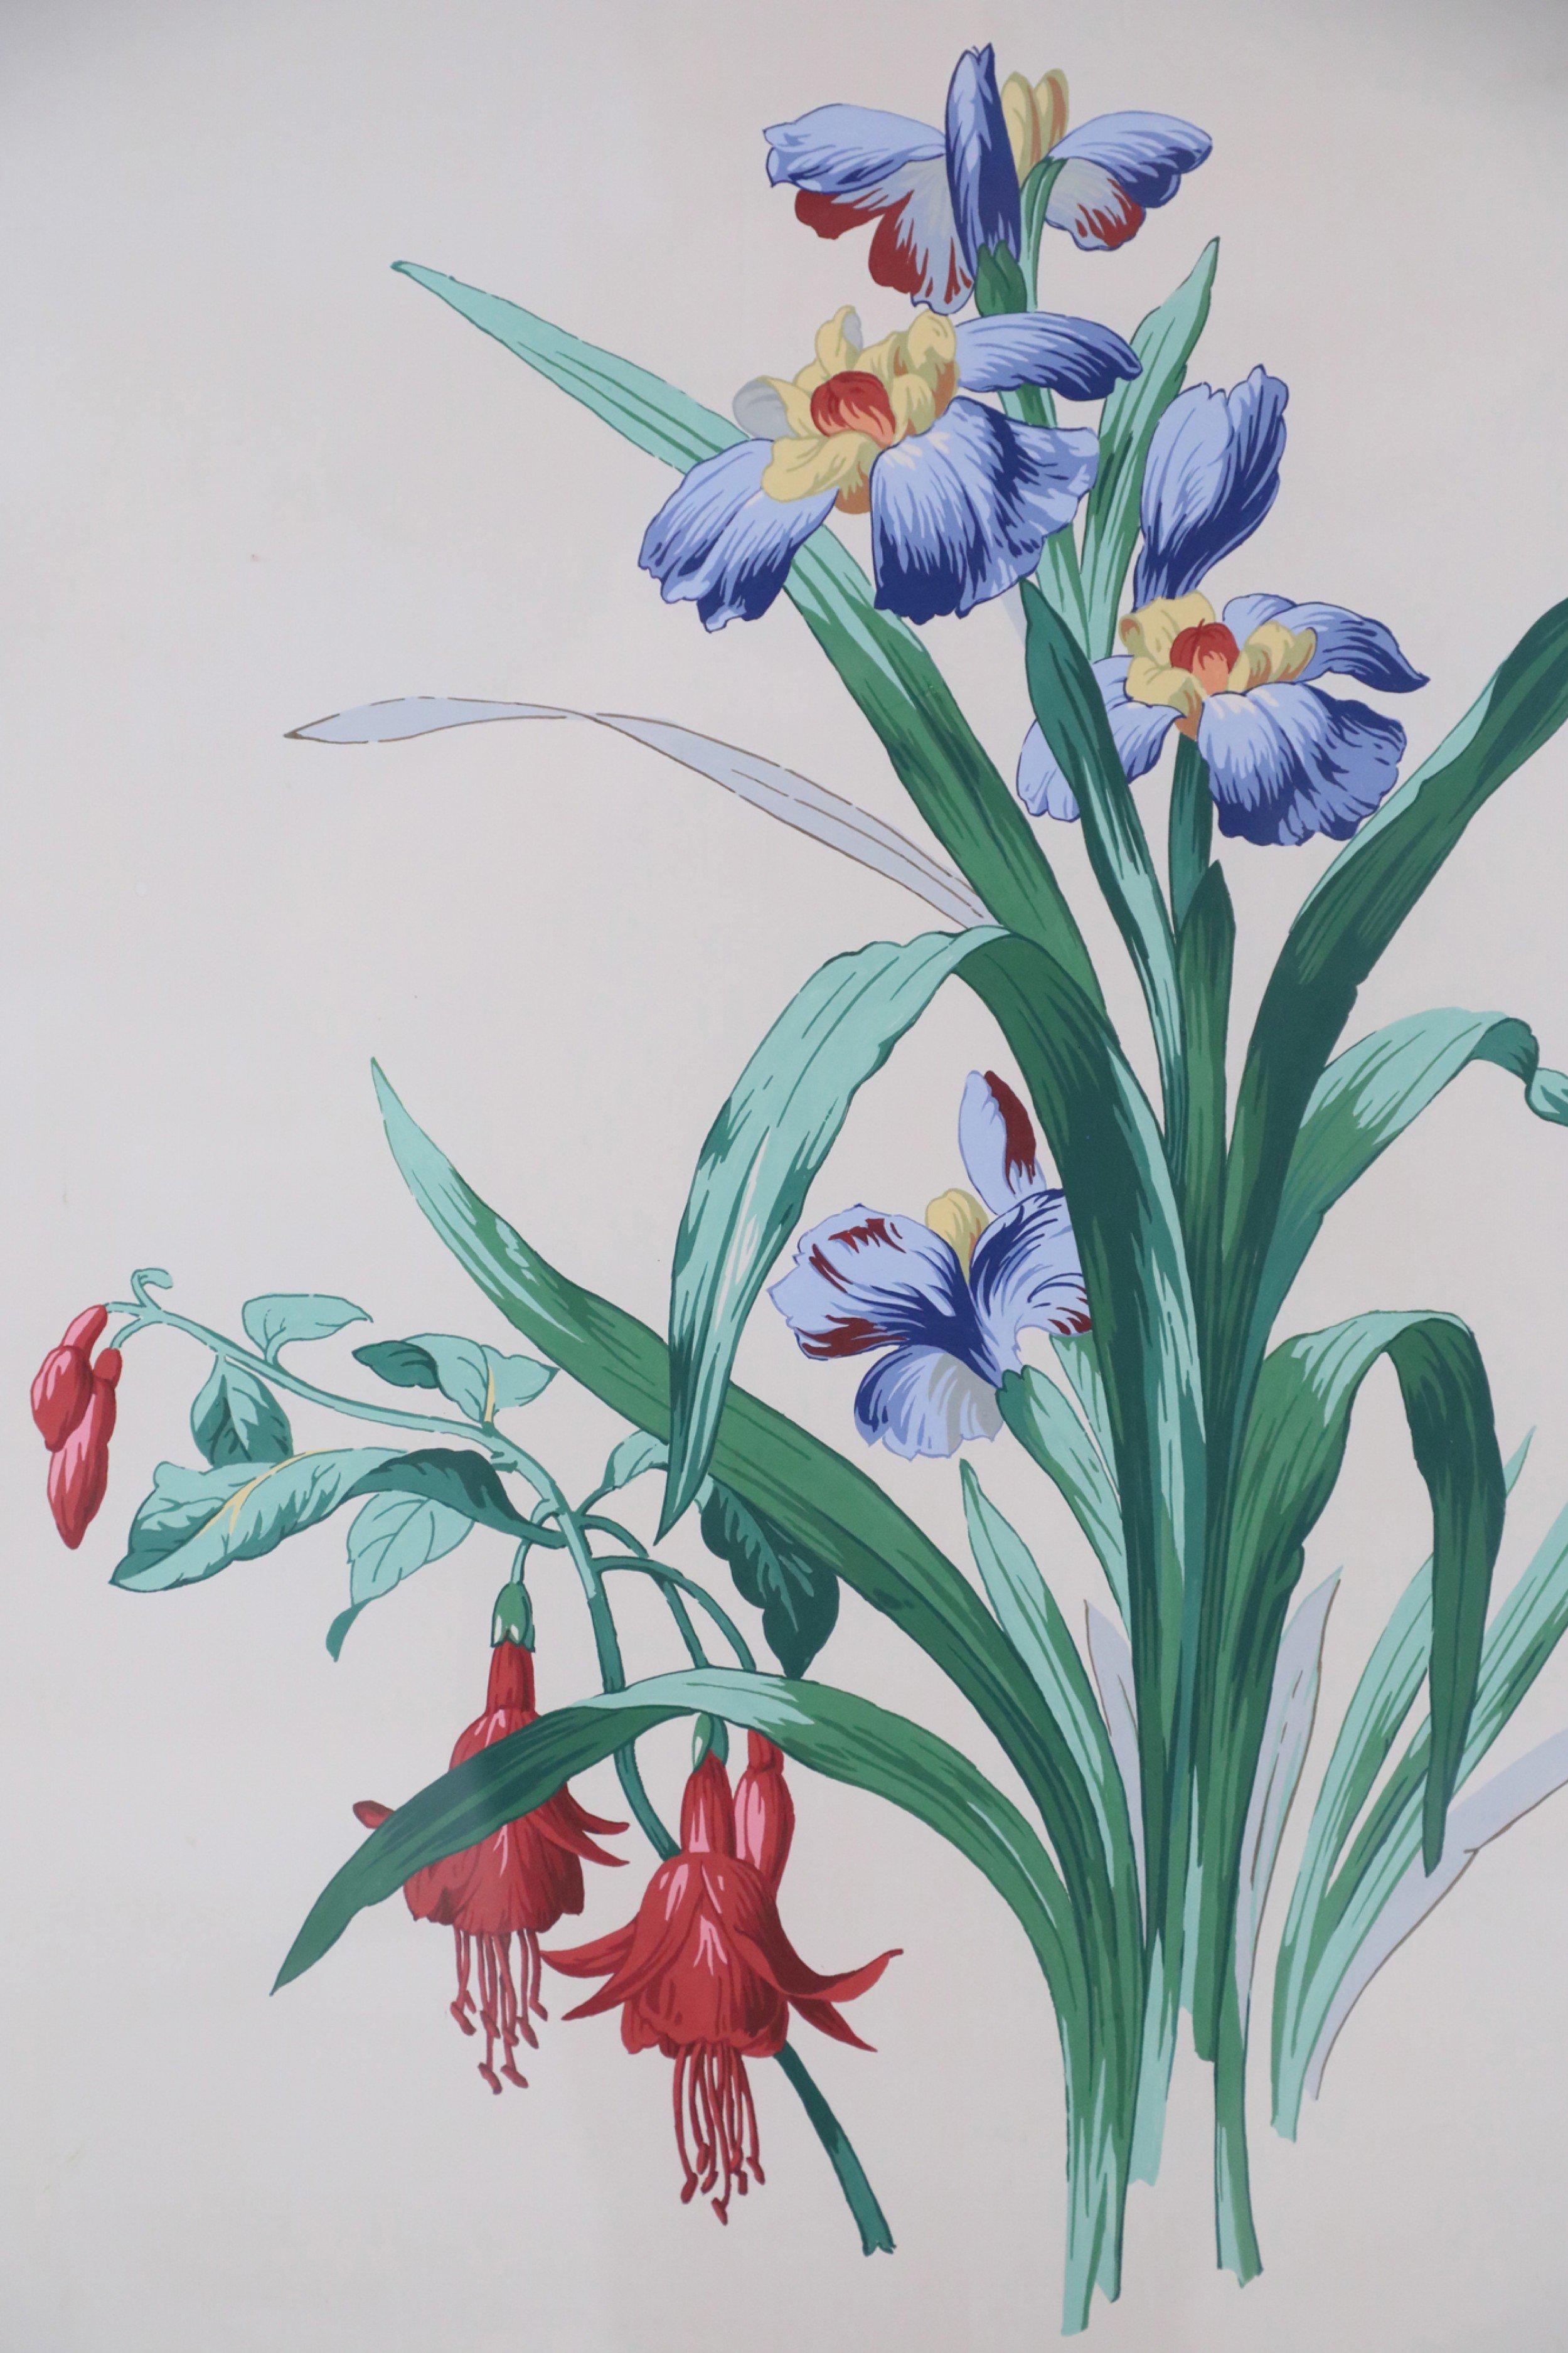 Mid-Century illustration / watercolor of a bouquet of blue and yellow irises in a burgundy and light blue double mat and a rectangular giltwood frame.
 